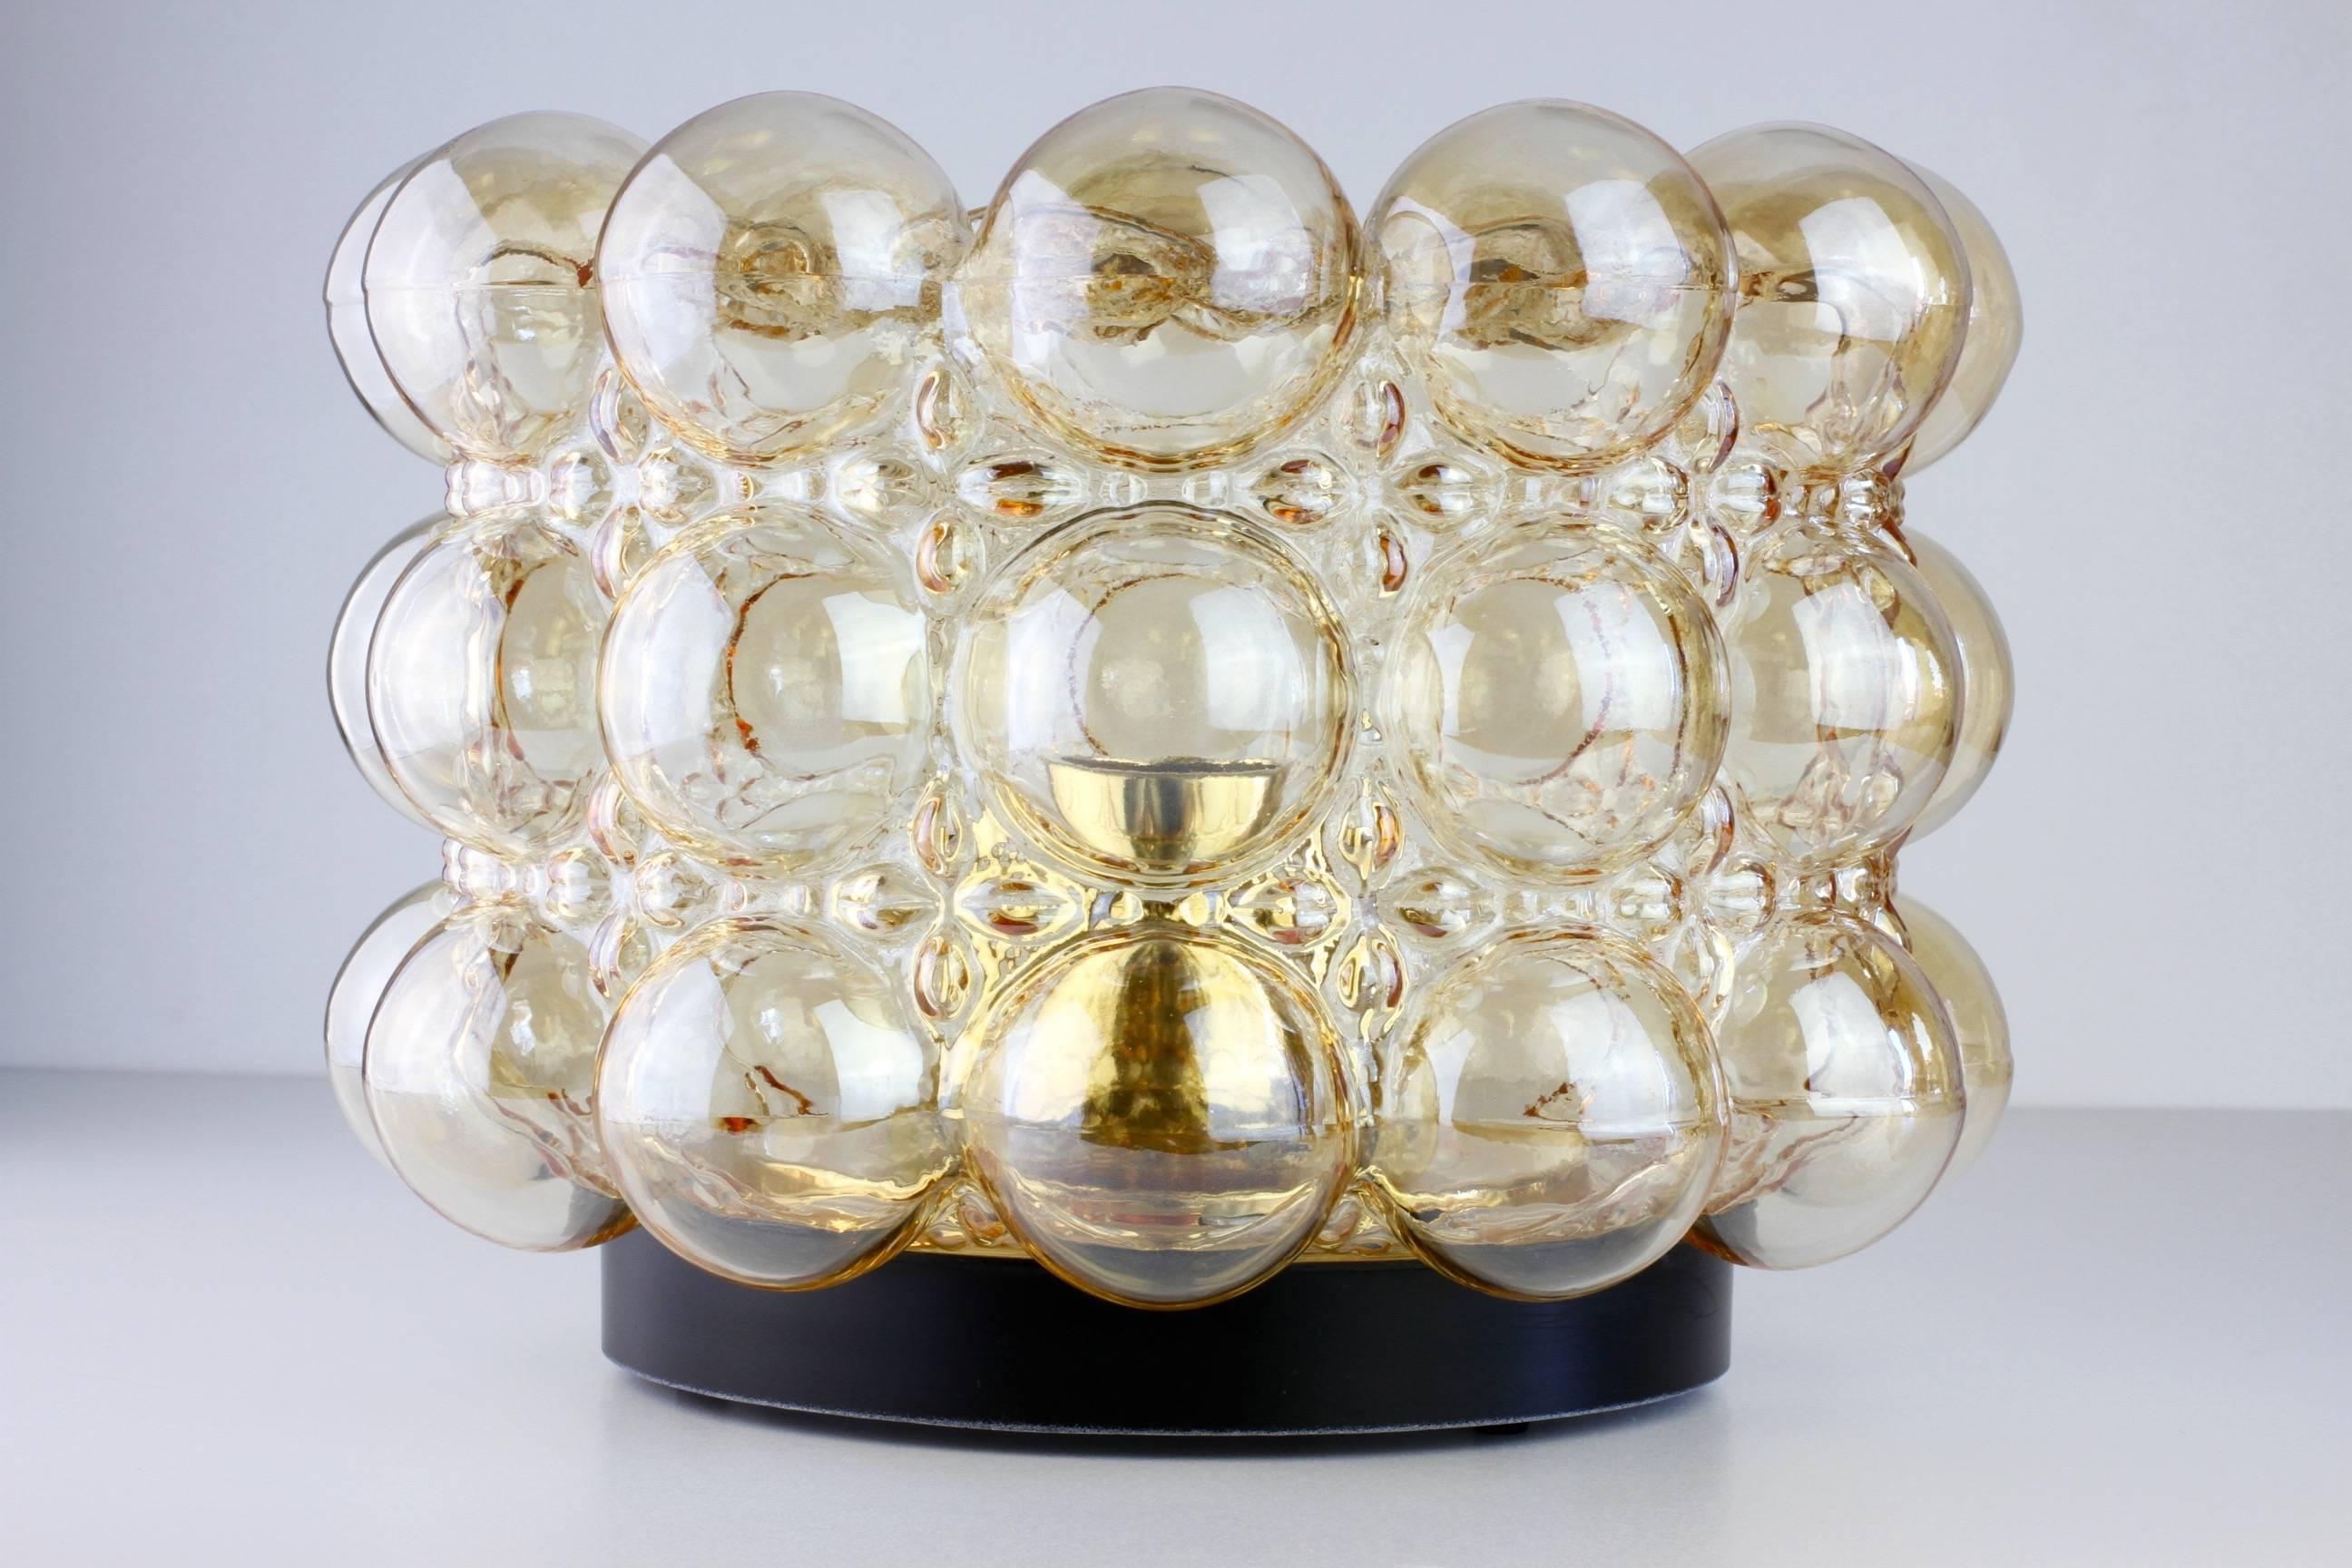 One of a beautiful pair of amber or champagne colored (colored) bubble glass sconces designed by Helena Tynell for Glashütte Limburg in the late 1960s or early 1970s. They look simply stunning mounted on the ceiling or wall and give a wonderful warm